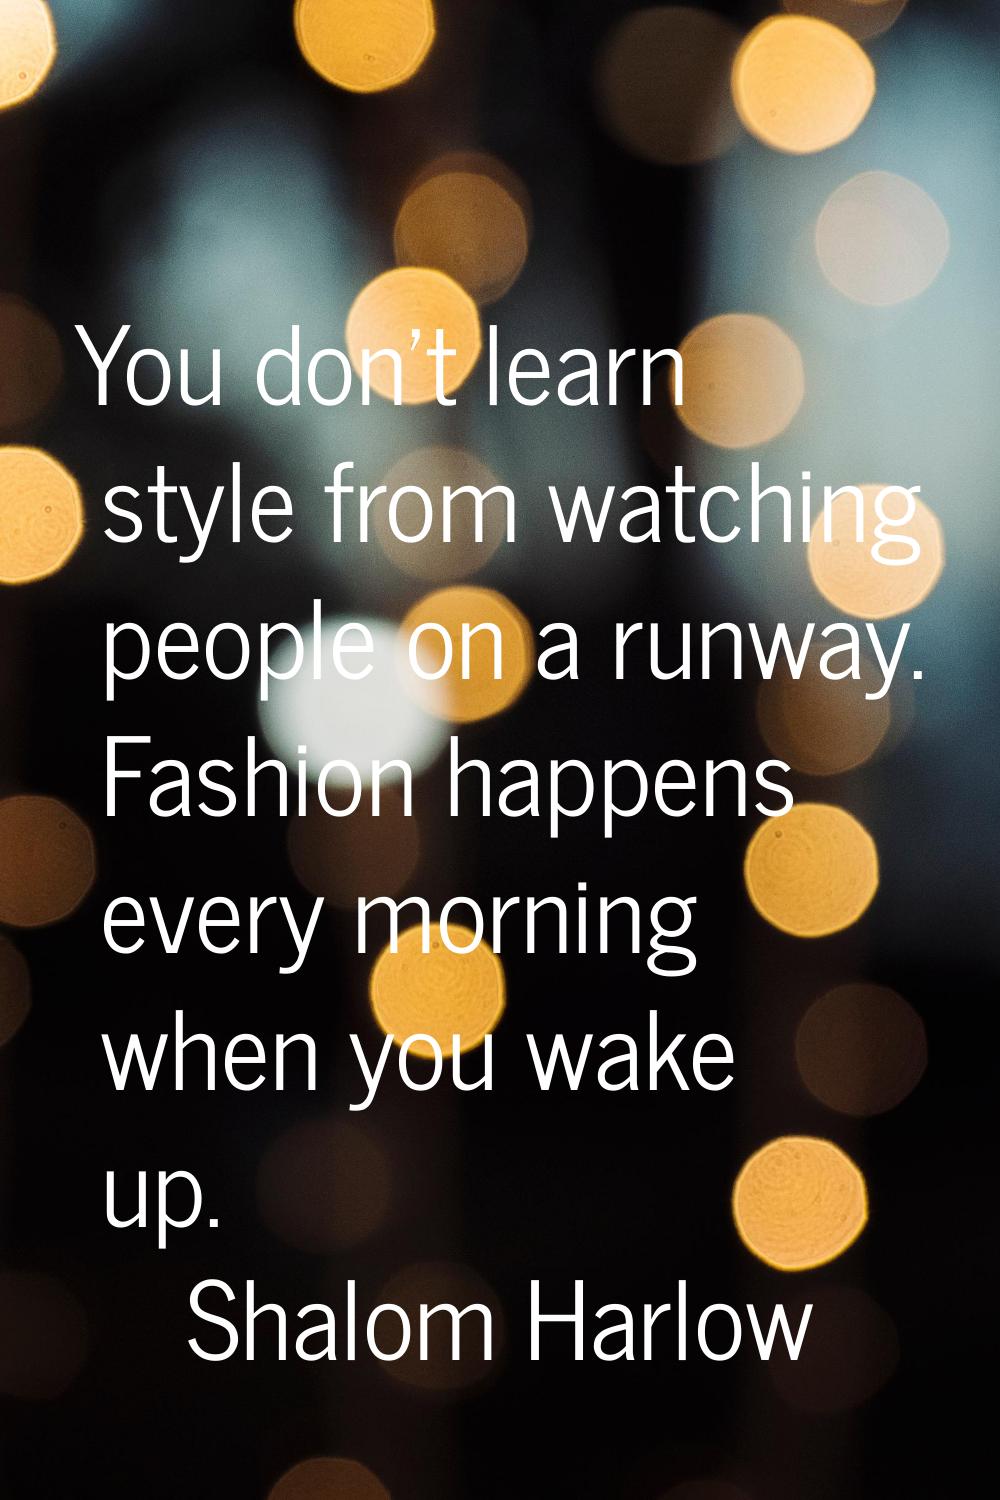 You don't learn style from watching people on a runway. Fashion happens every morning when you wake